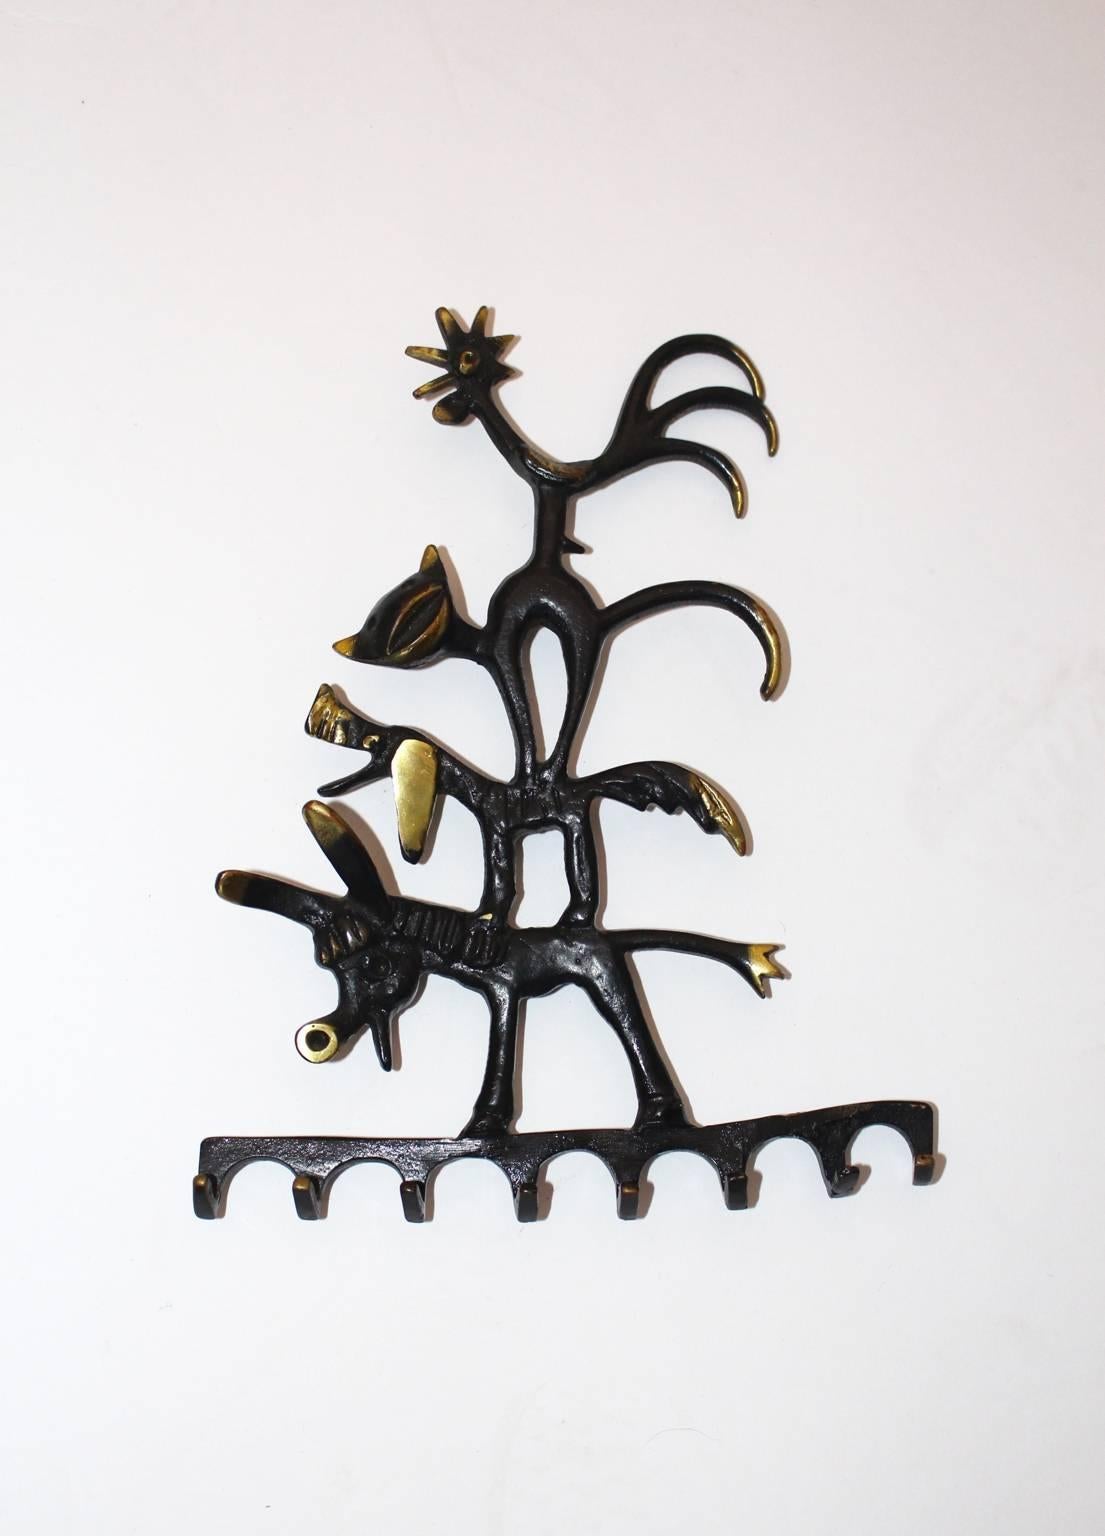 Very nice Key Hanger designed by Walter Bosse and executed by Herta Baller, Austria, 1950s. 
The motif signs the figures of the 